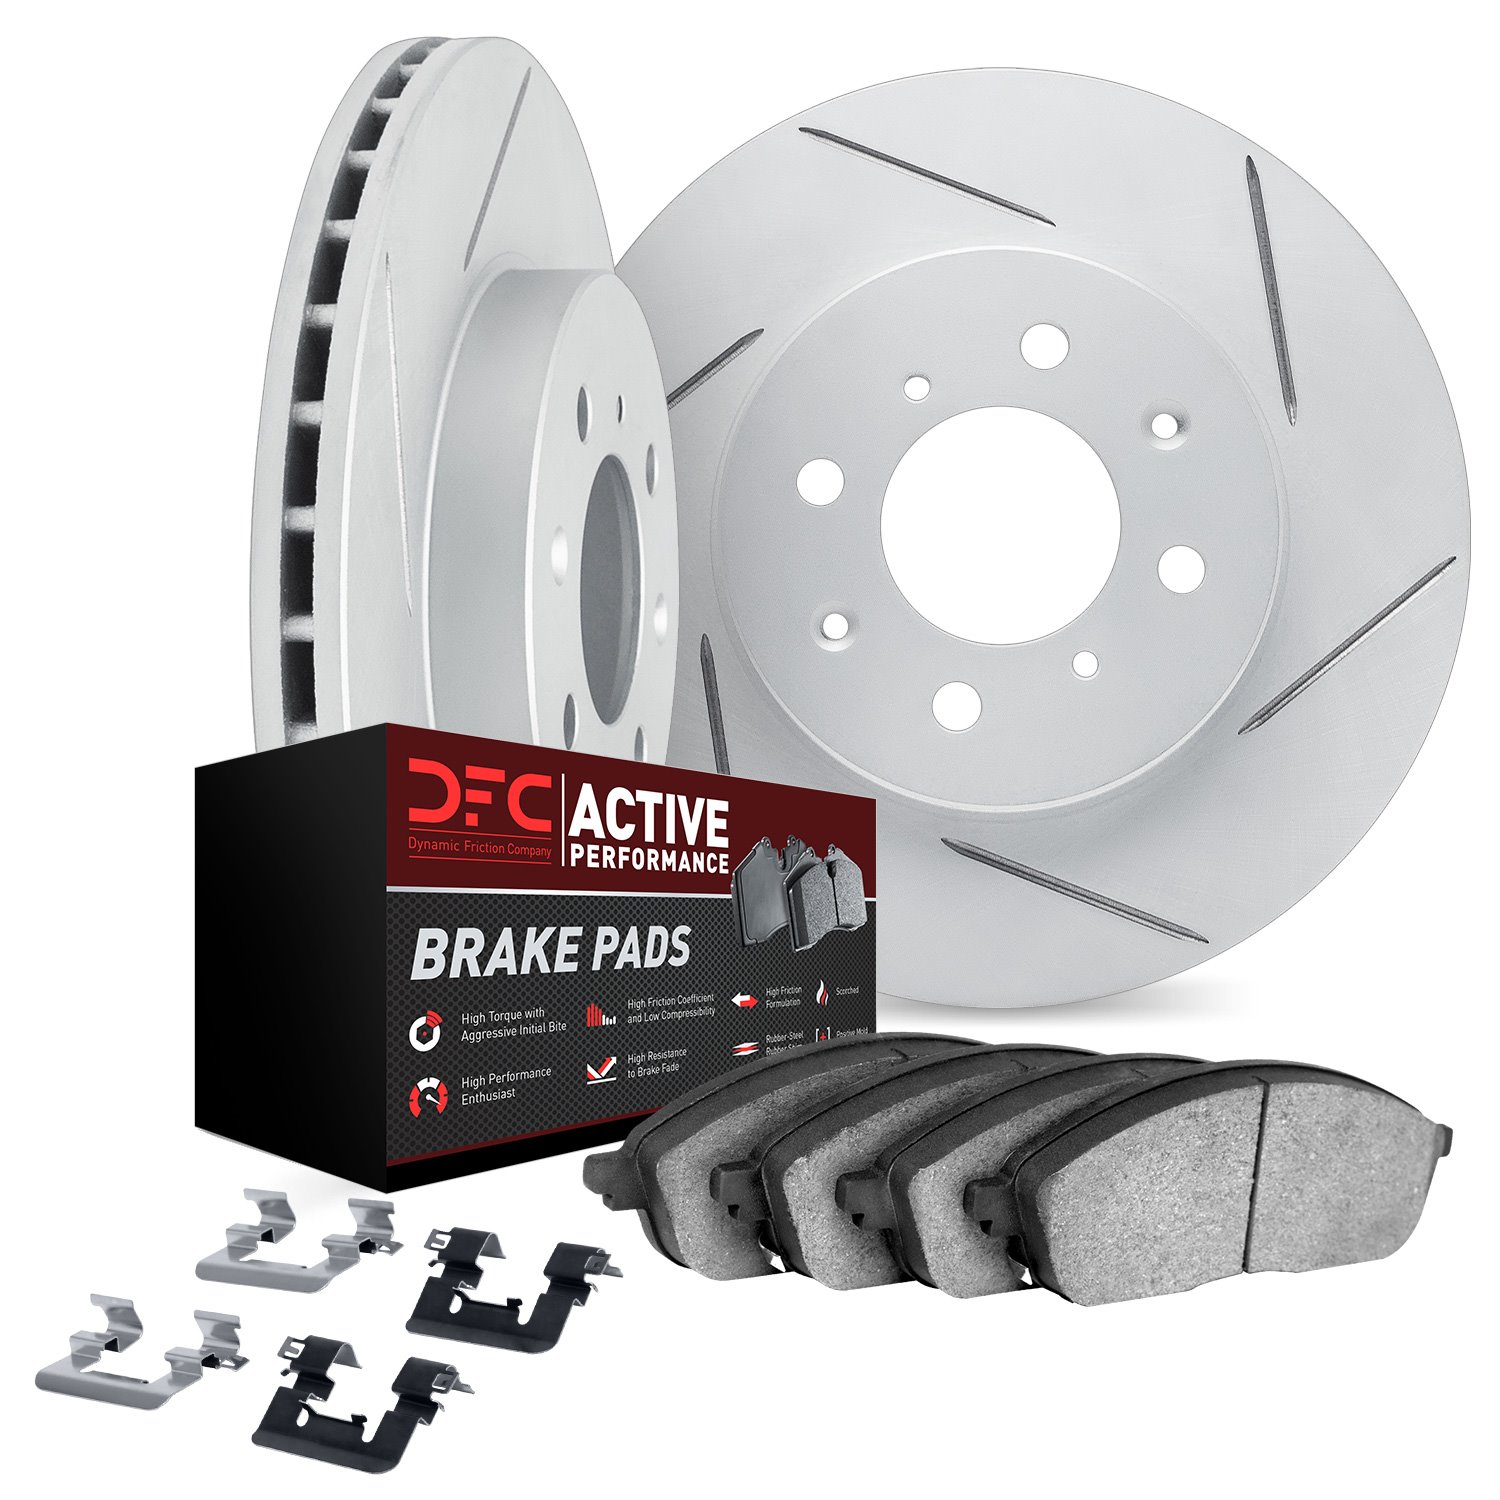 2712-54024 Geoperformance Slotted Brake Rotors with Active Performance Pads Kits & Hardware, 2005-2012 Ford/Lincoln/Mercury/Mazd